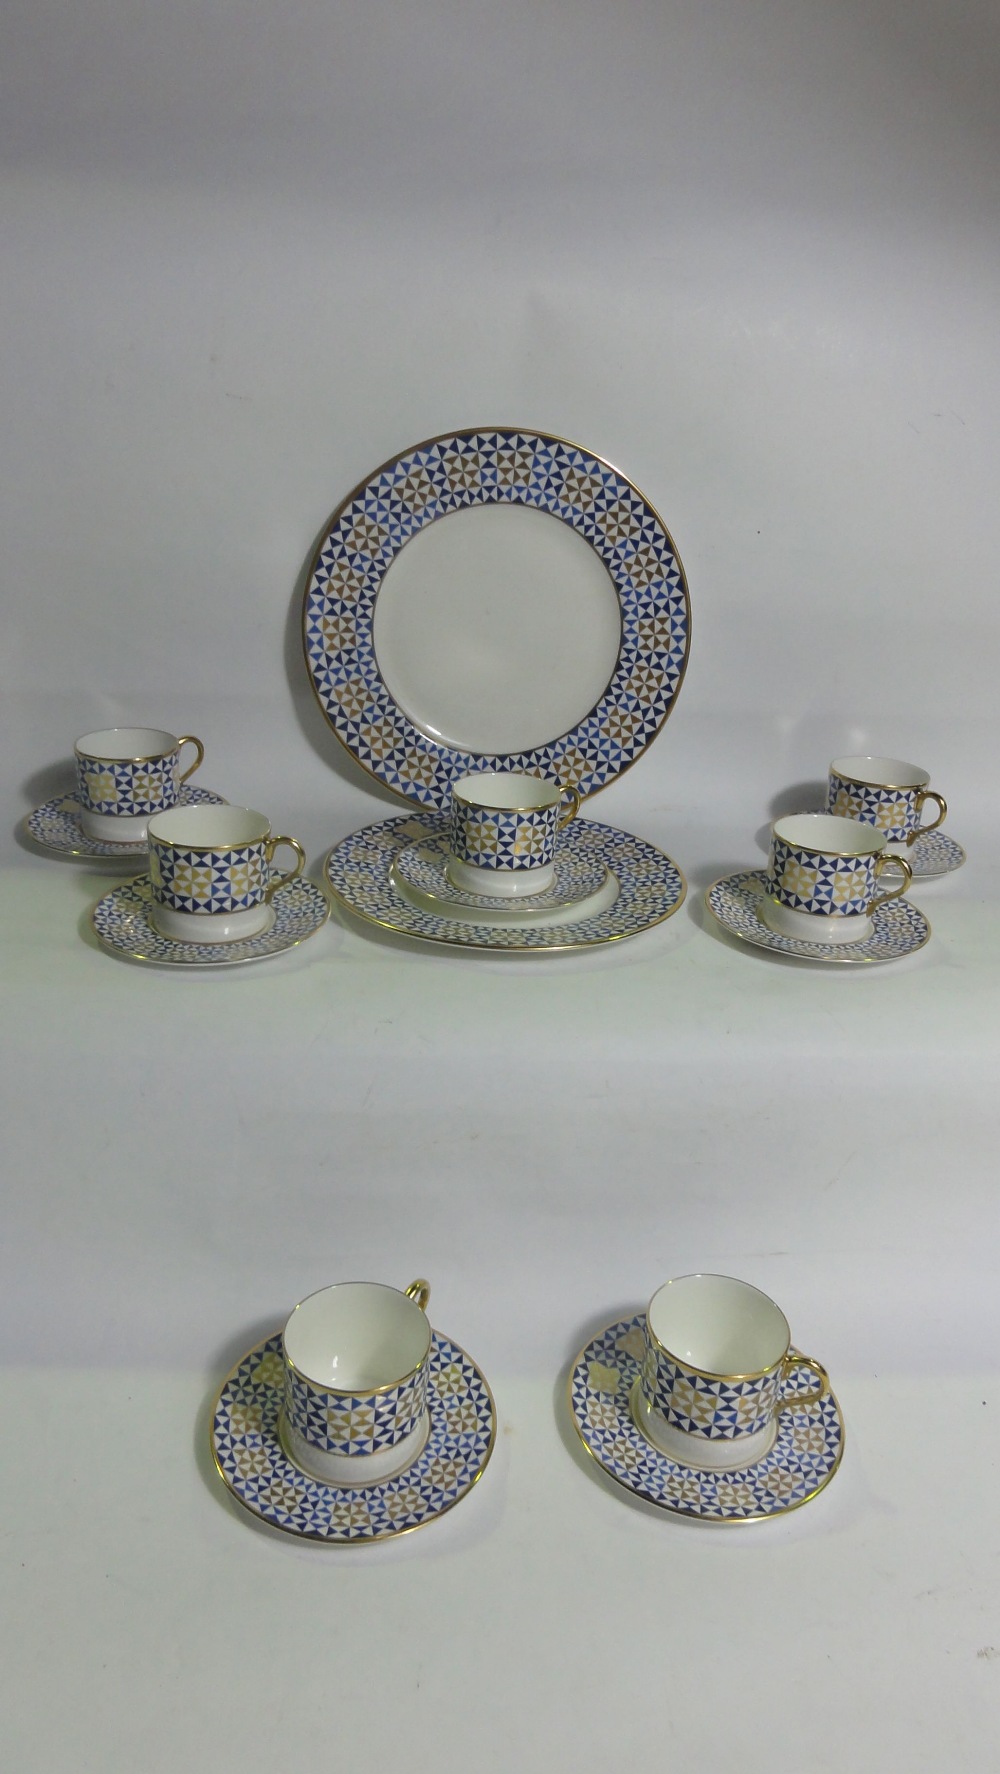 A quantity of traditional arts "Elementa" blue and gold geometric pattern coffee cans and saucers (